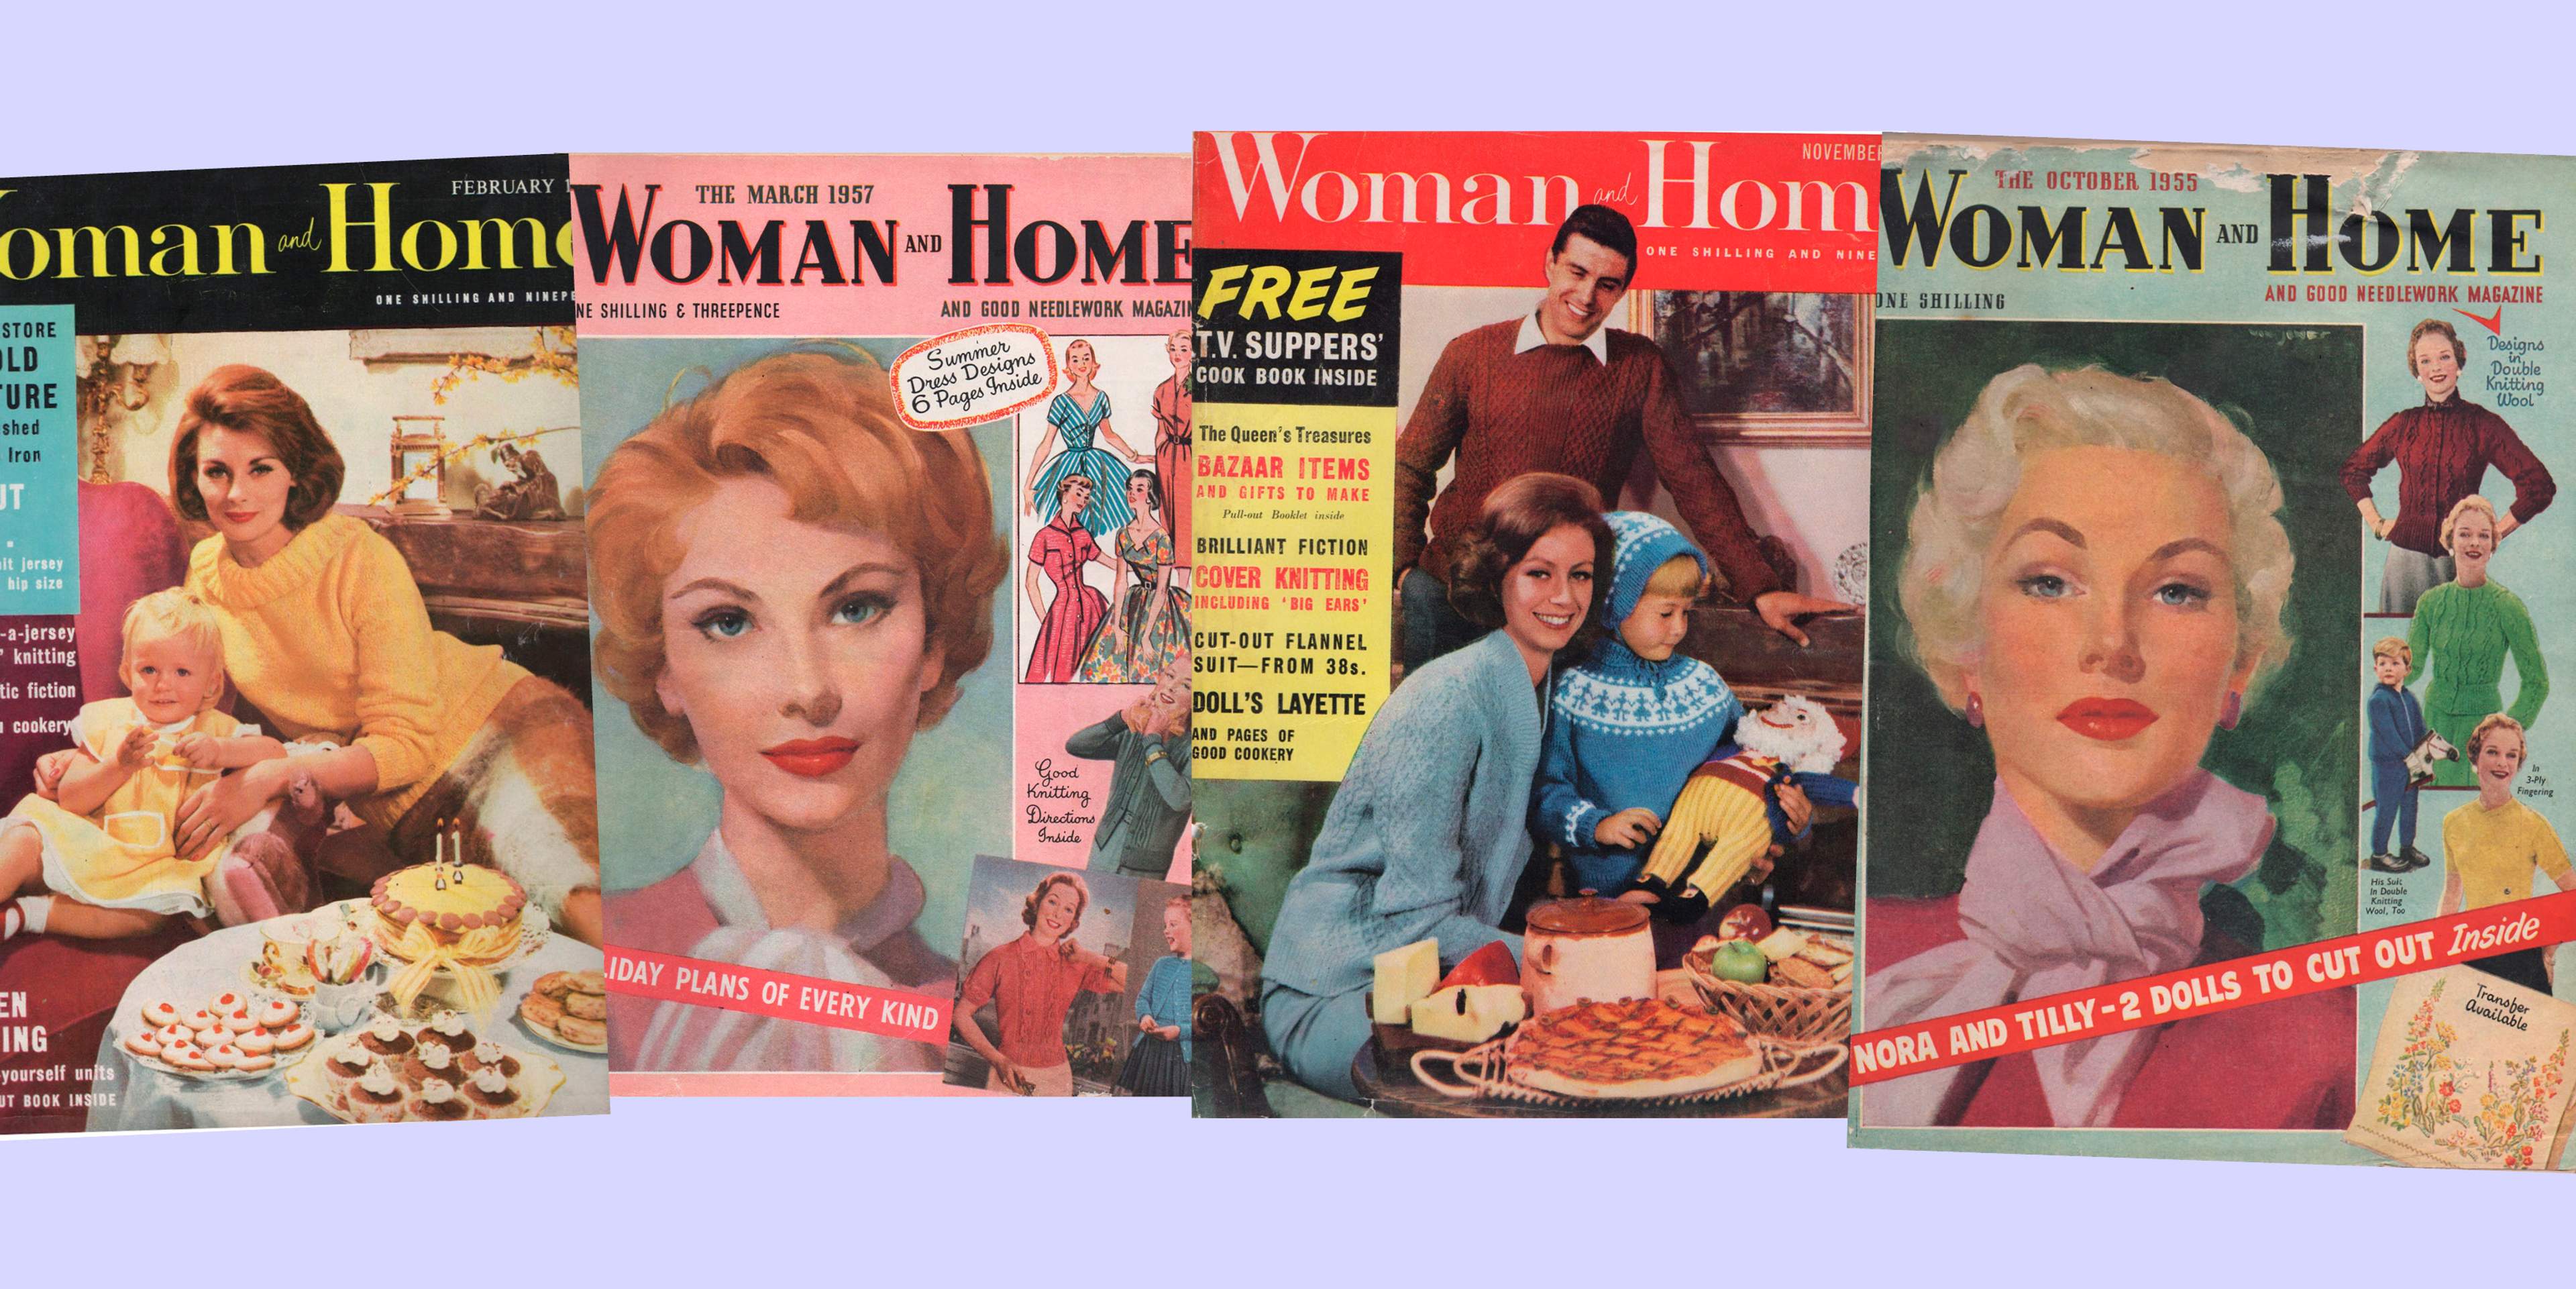 1950s and 1960s women's magazine covers. A selection of Woman and Home magazines.